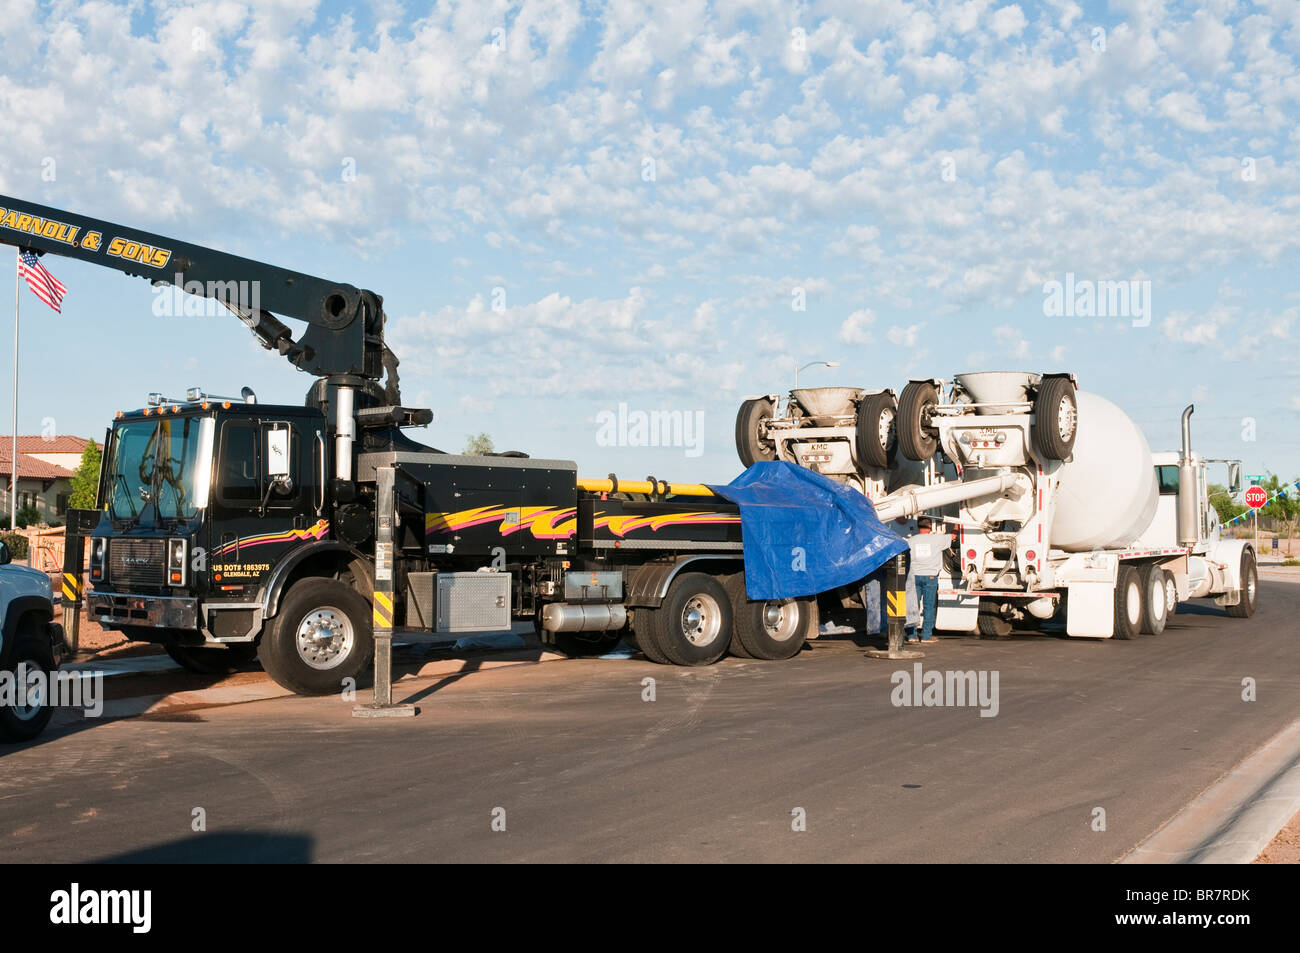 Concrete trucks feed a boom truck used for pumping concrete for a new house under construction in Arizona. Stock Photo